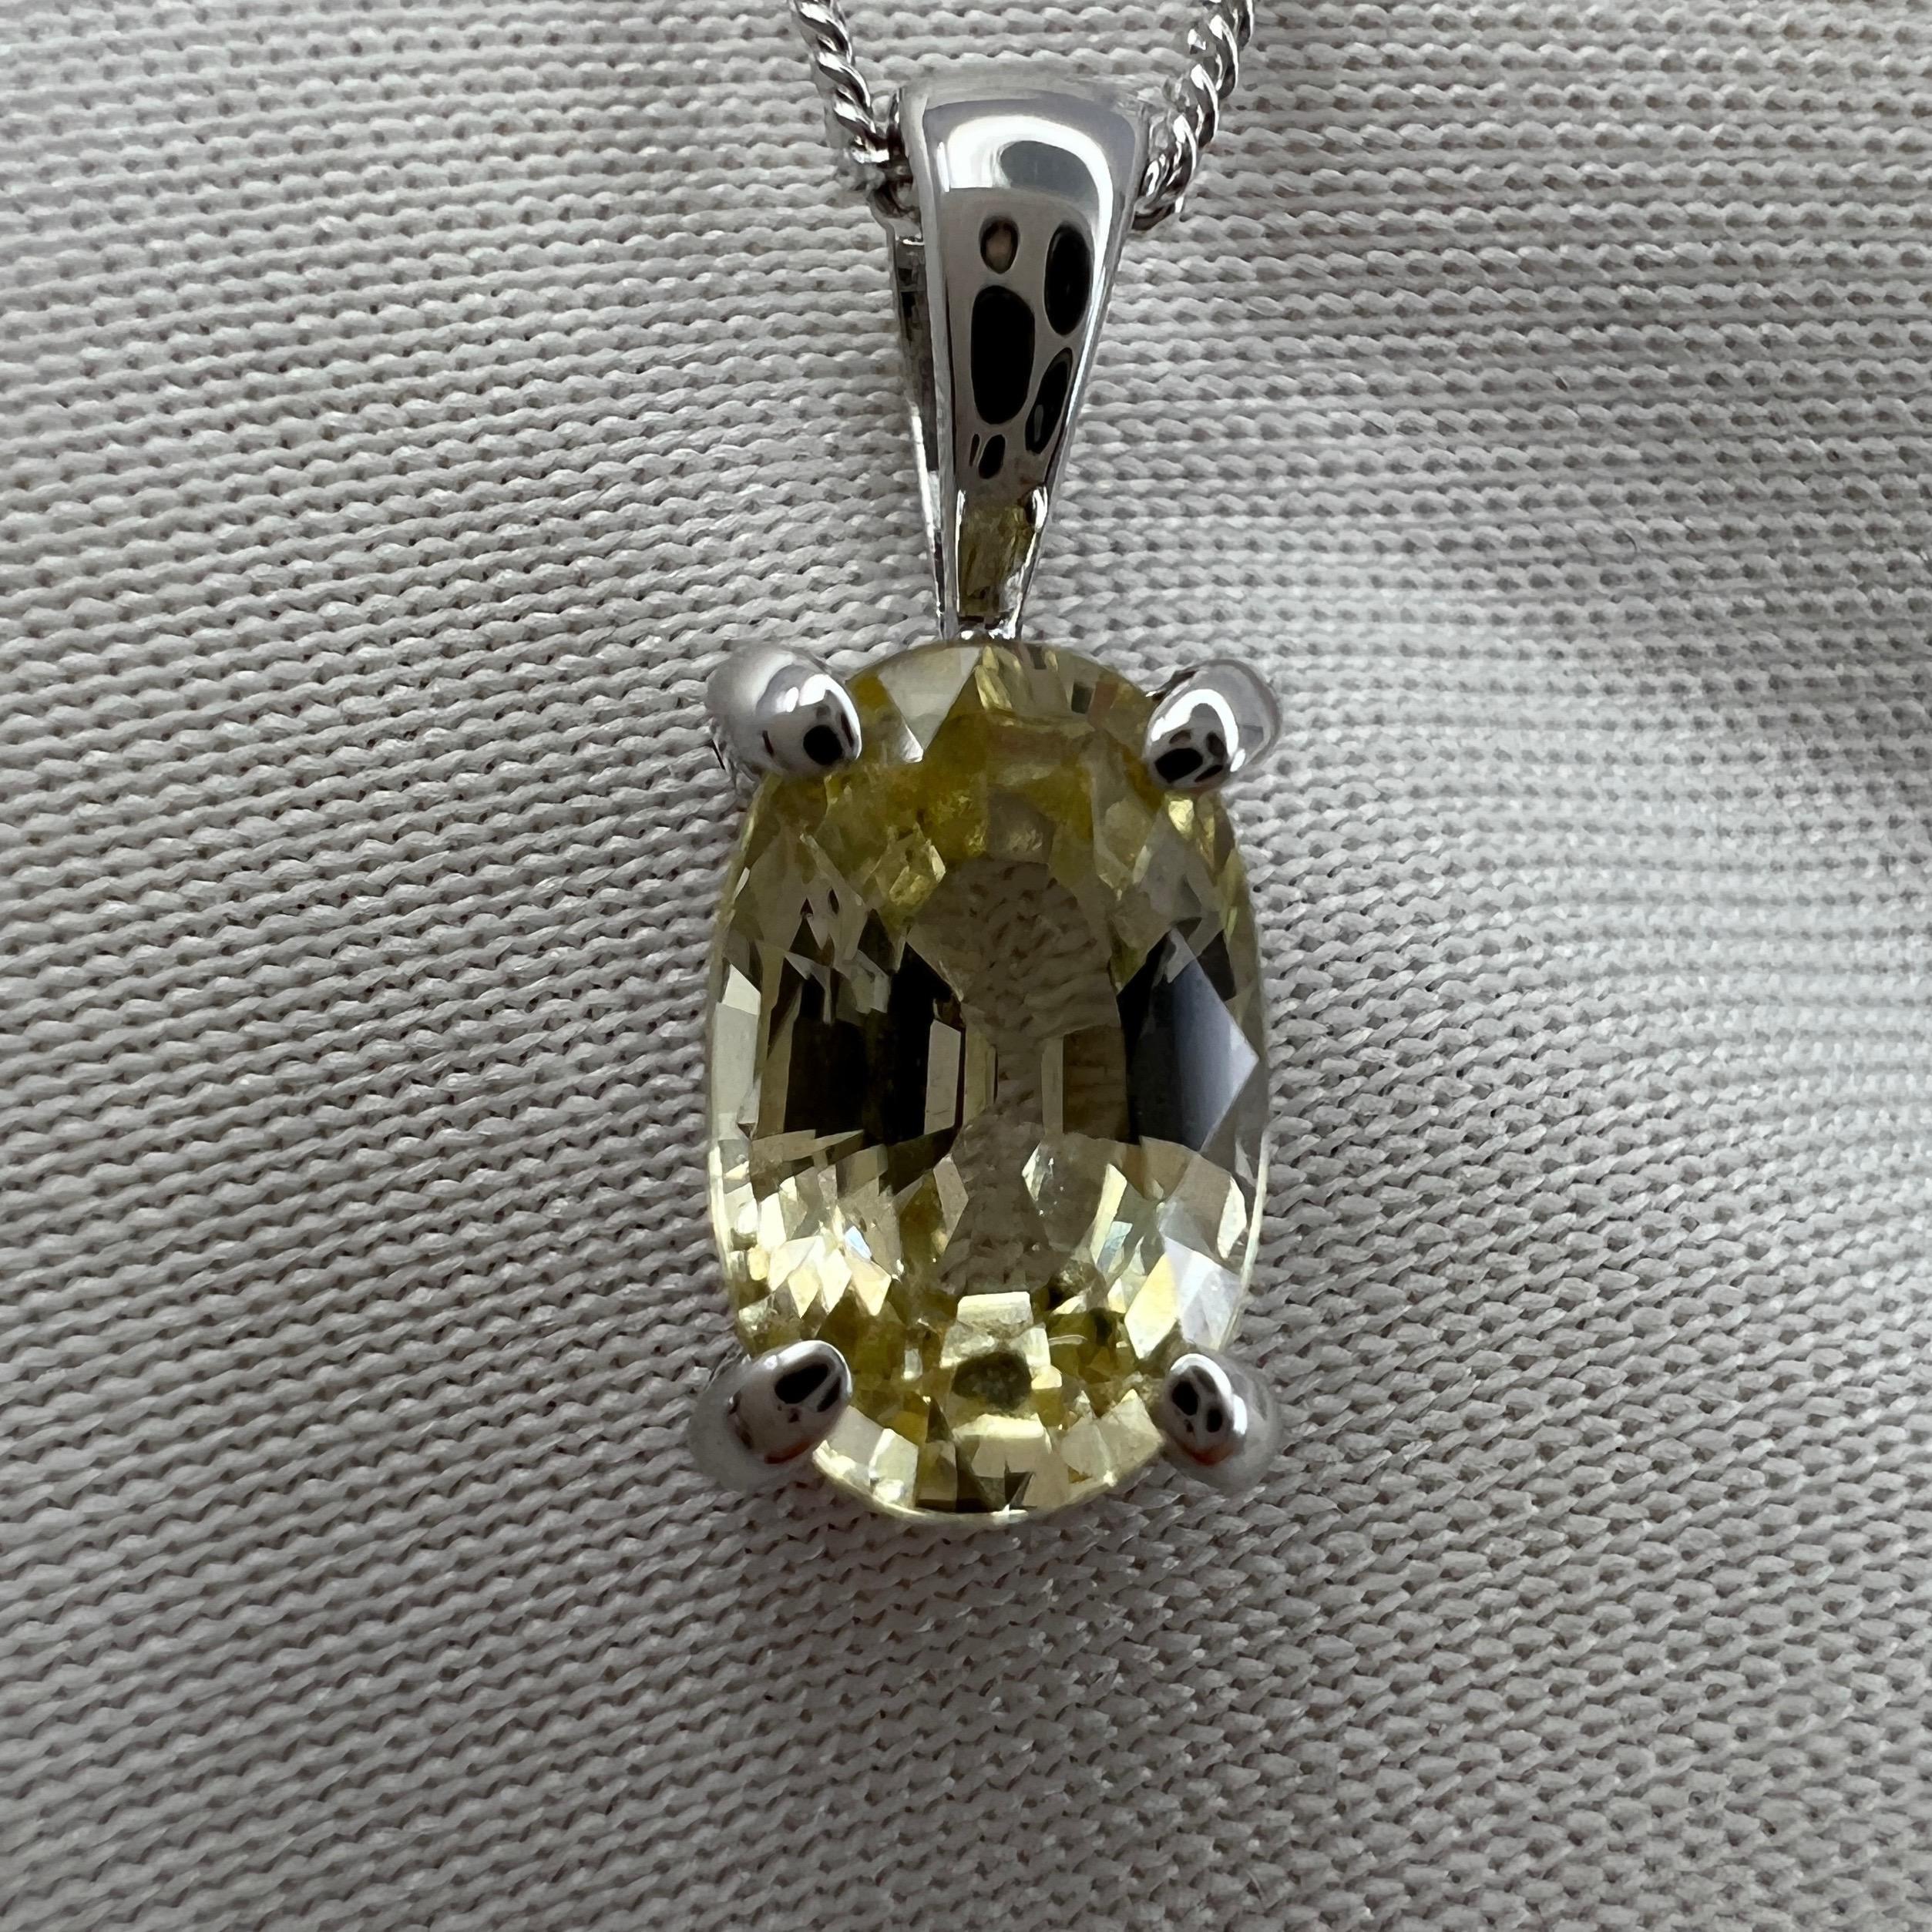 Oval Cut 1.23ct GIA Certified Ceylon Sapphire Yellow Untreated 18k White Gold Pendant For Sale